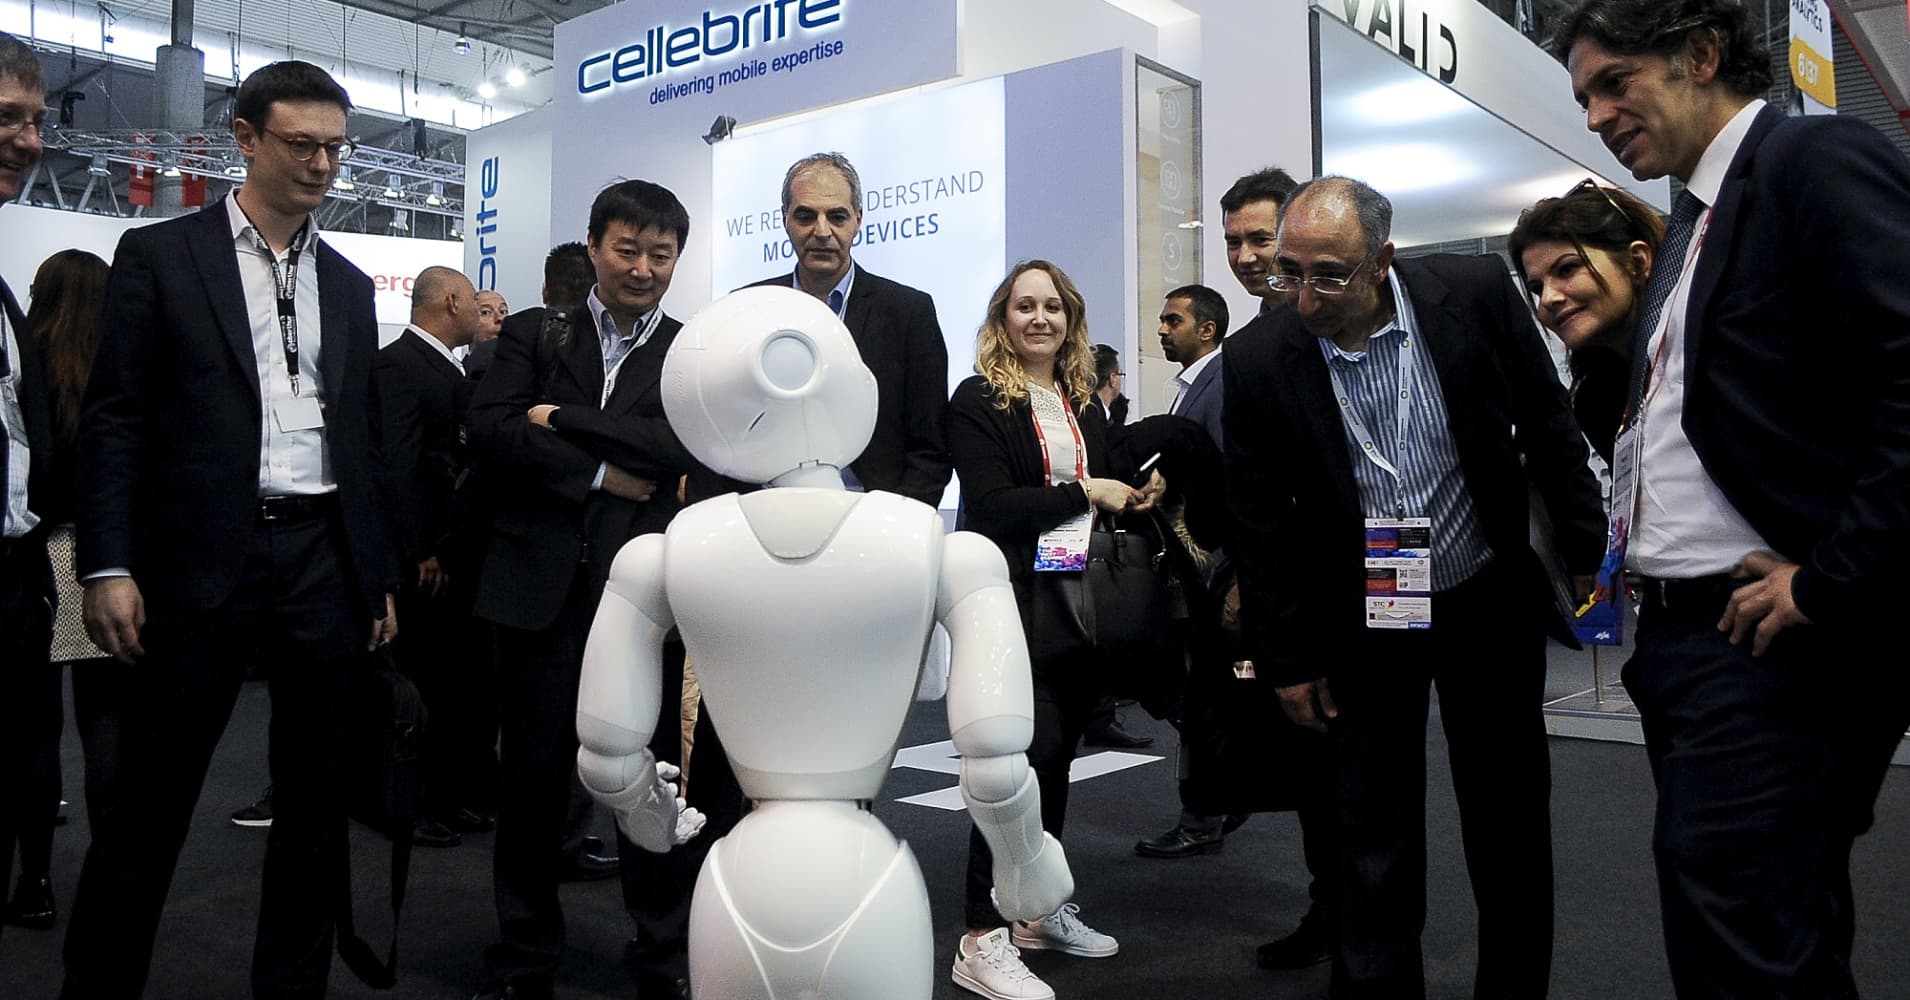 Congess attendees speak with a robot during the Mobile World Congress, on February 27, 2017 in Barcelona, Spain.